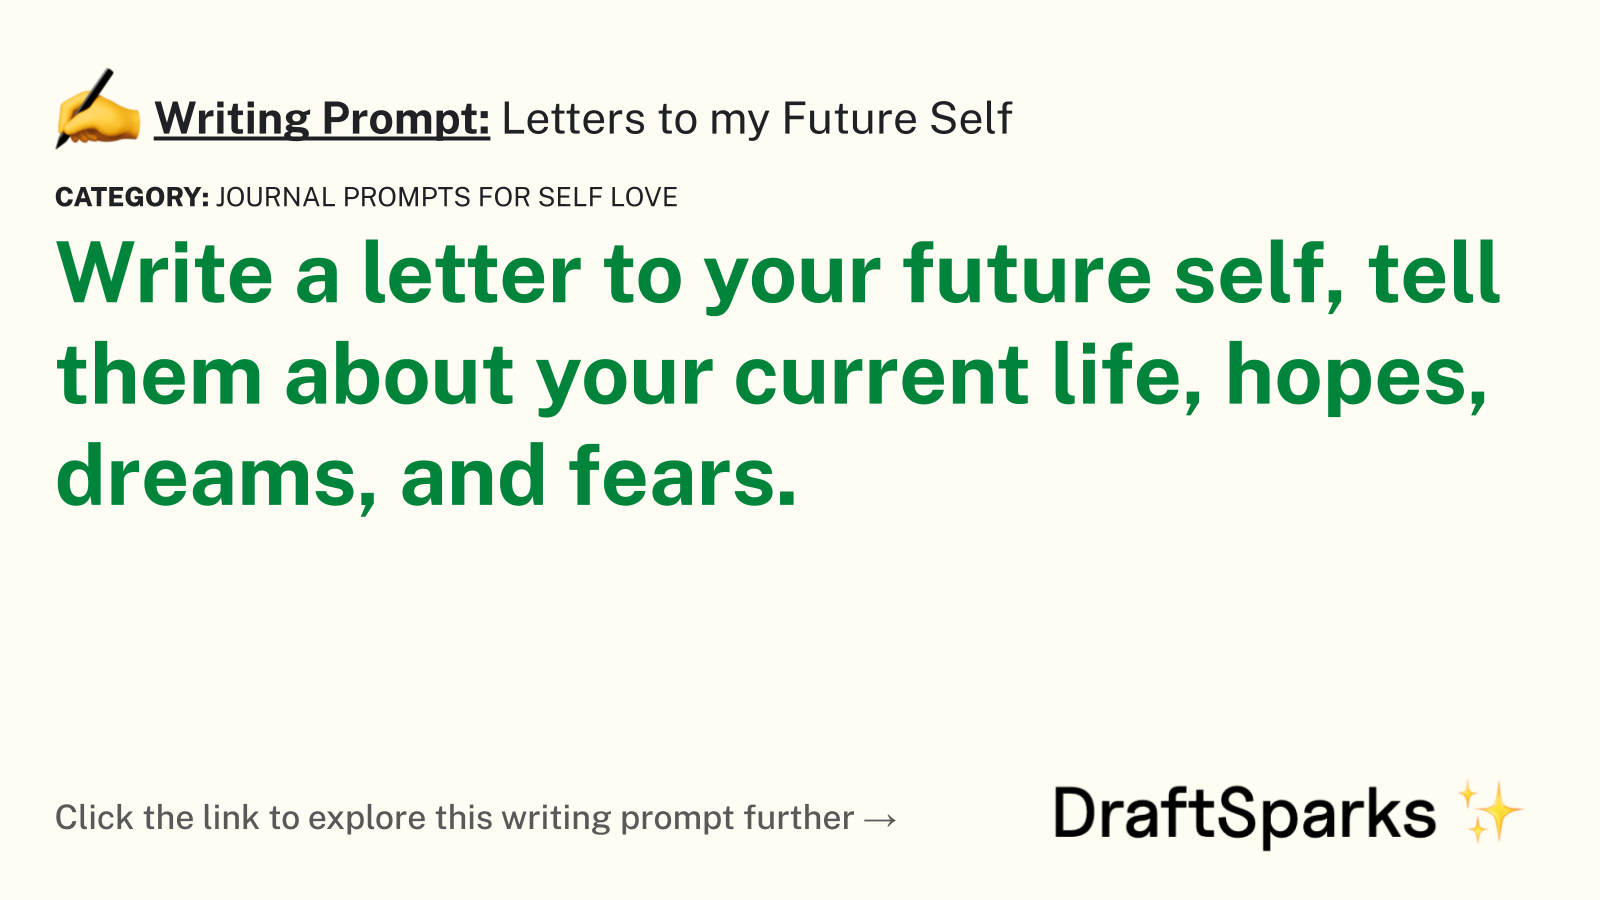 Letters to my Future Self